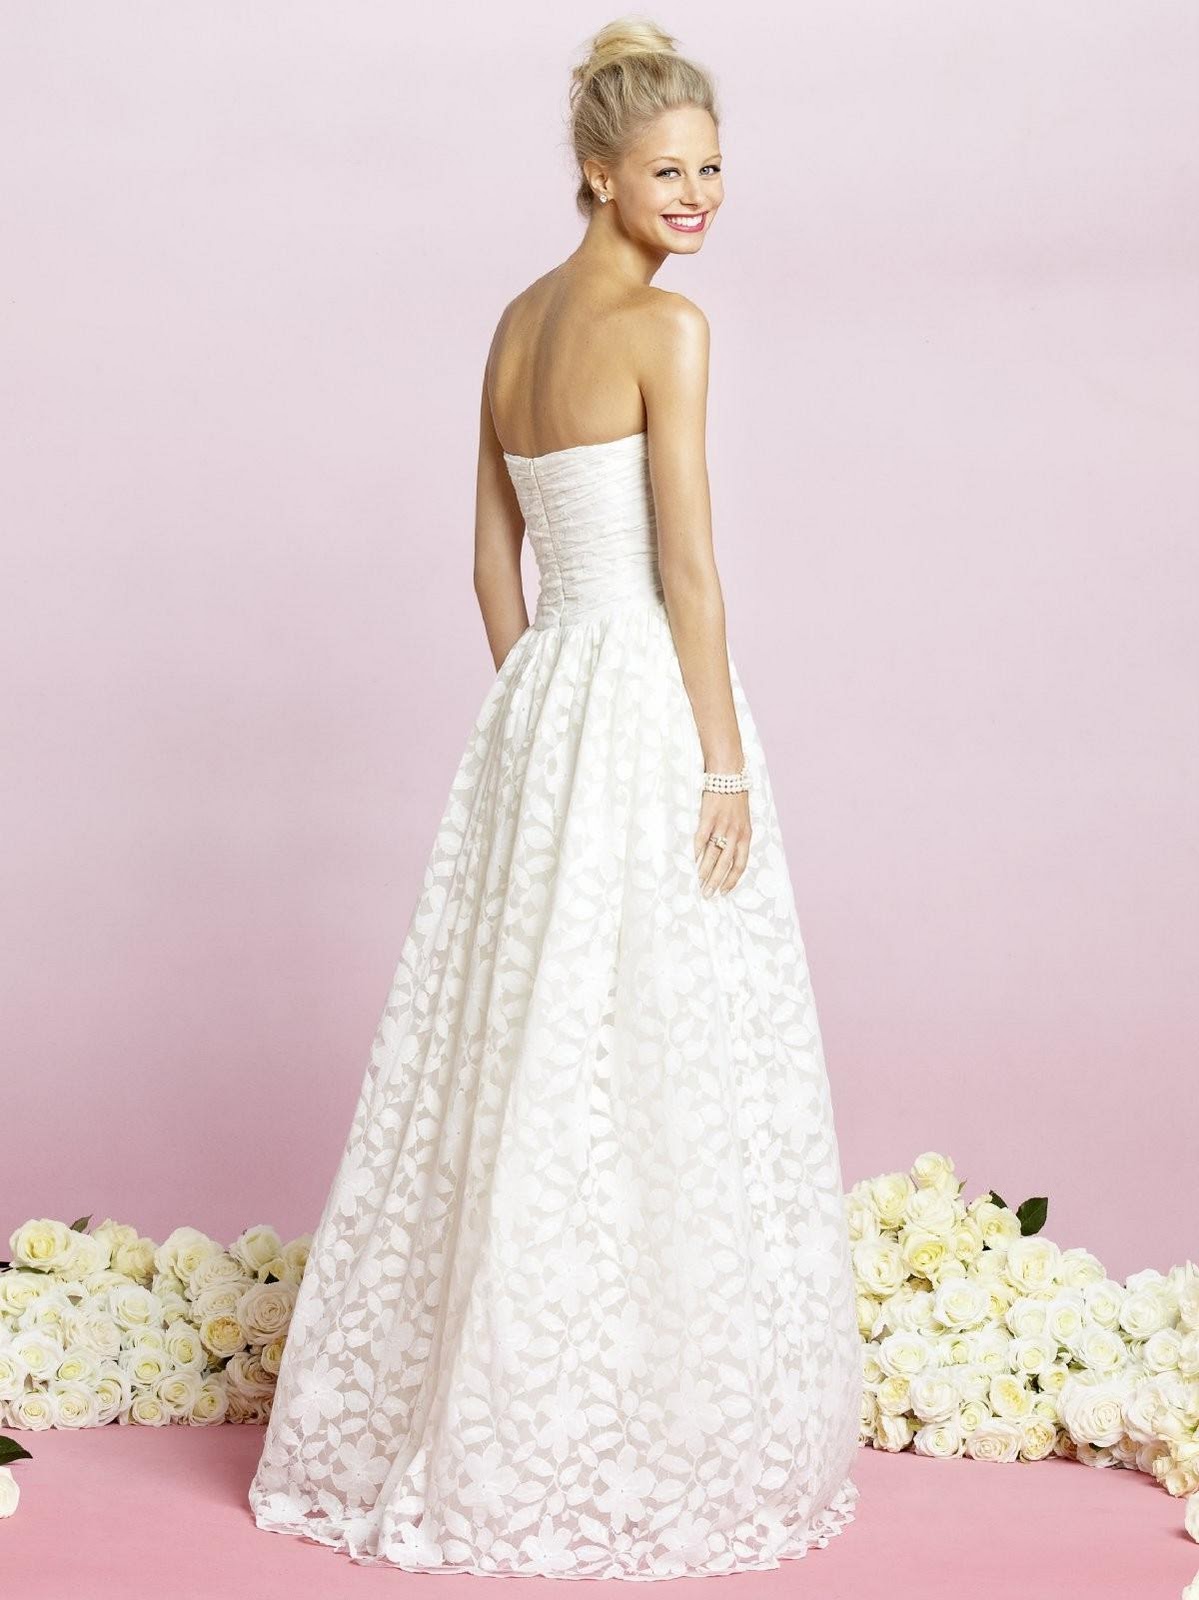 Full A Line Strapless Floor-length Lace Wedding Dress with Shirred Bodice